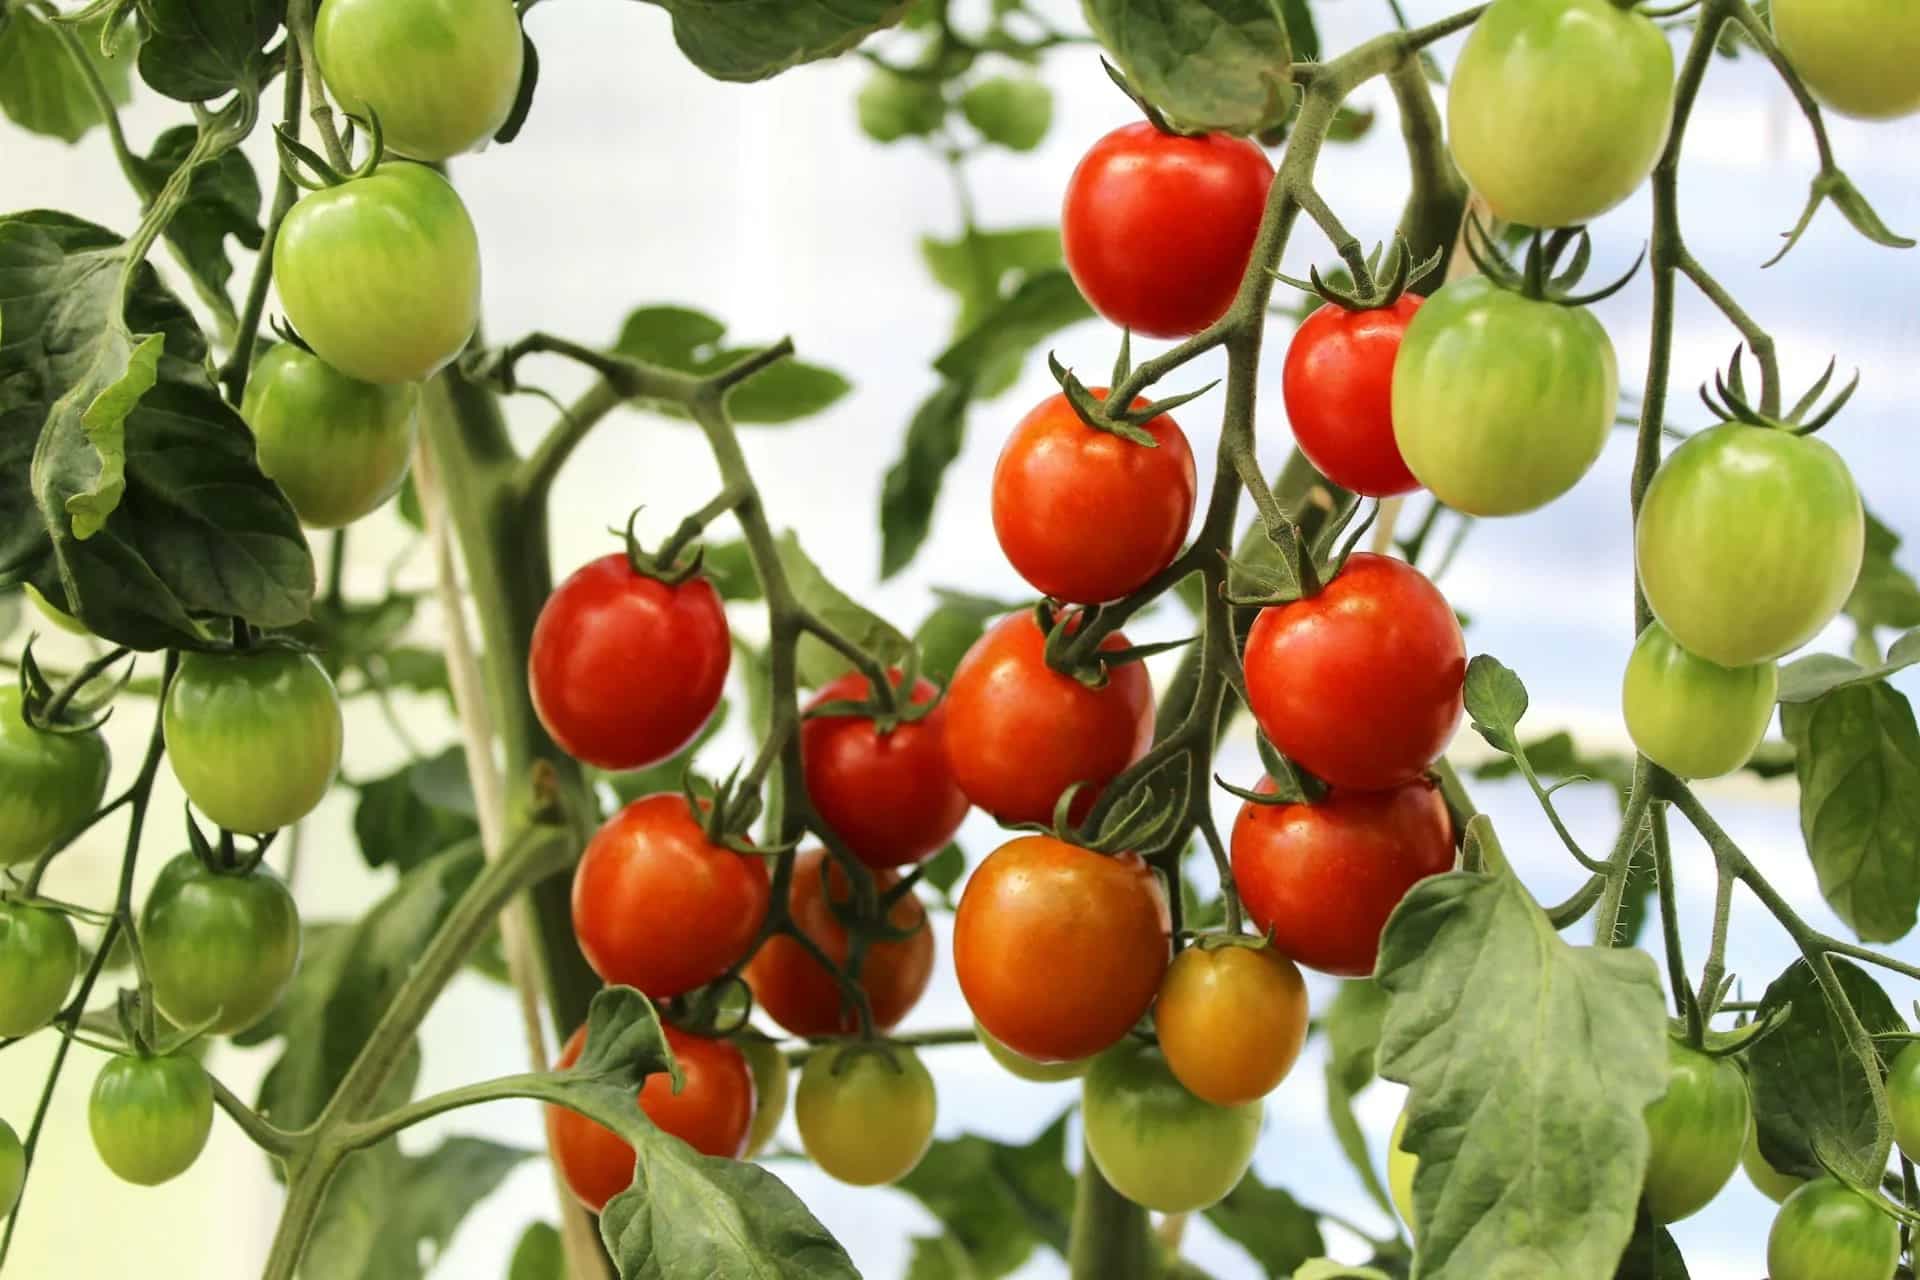 Can You Grow Cherry Tomatoes At Home? 6 Things You Should Know